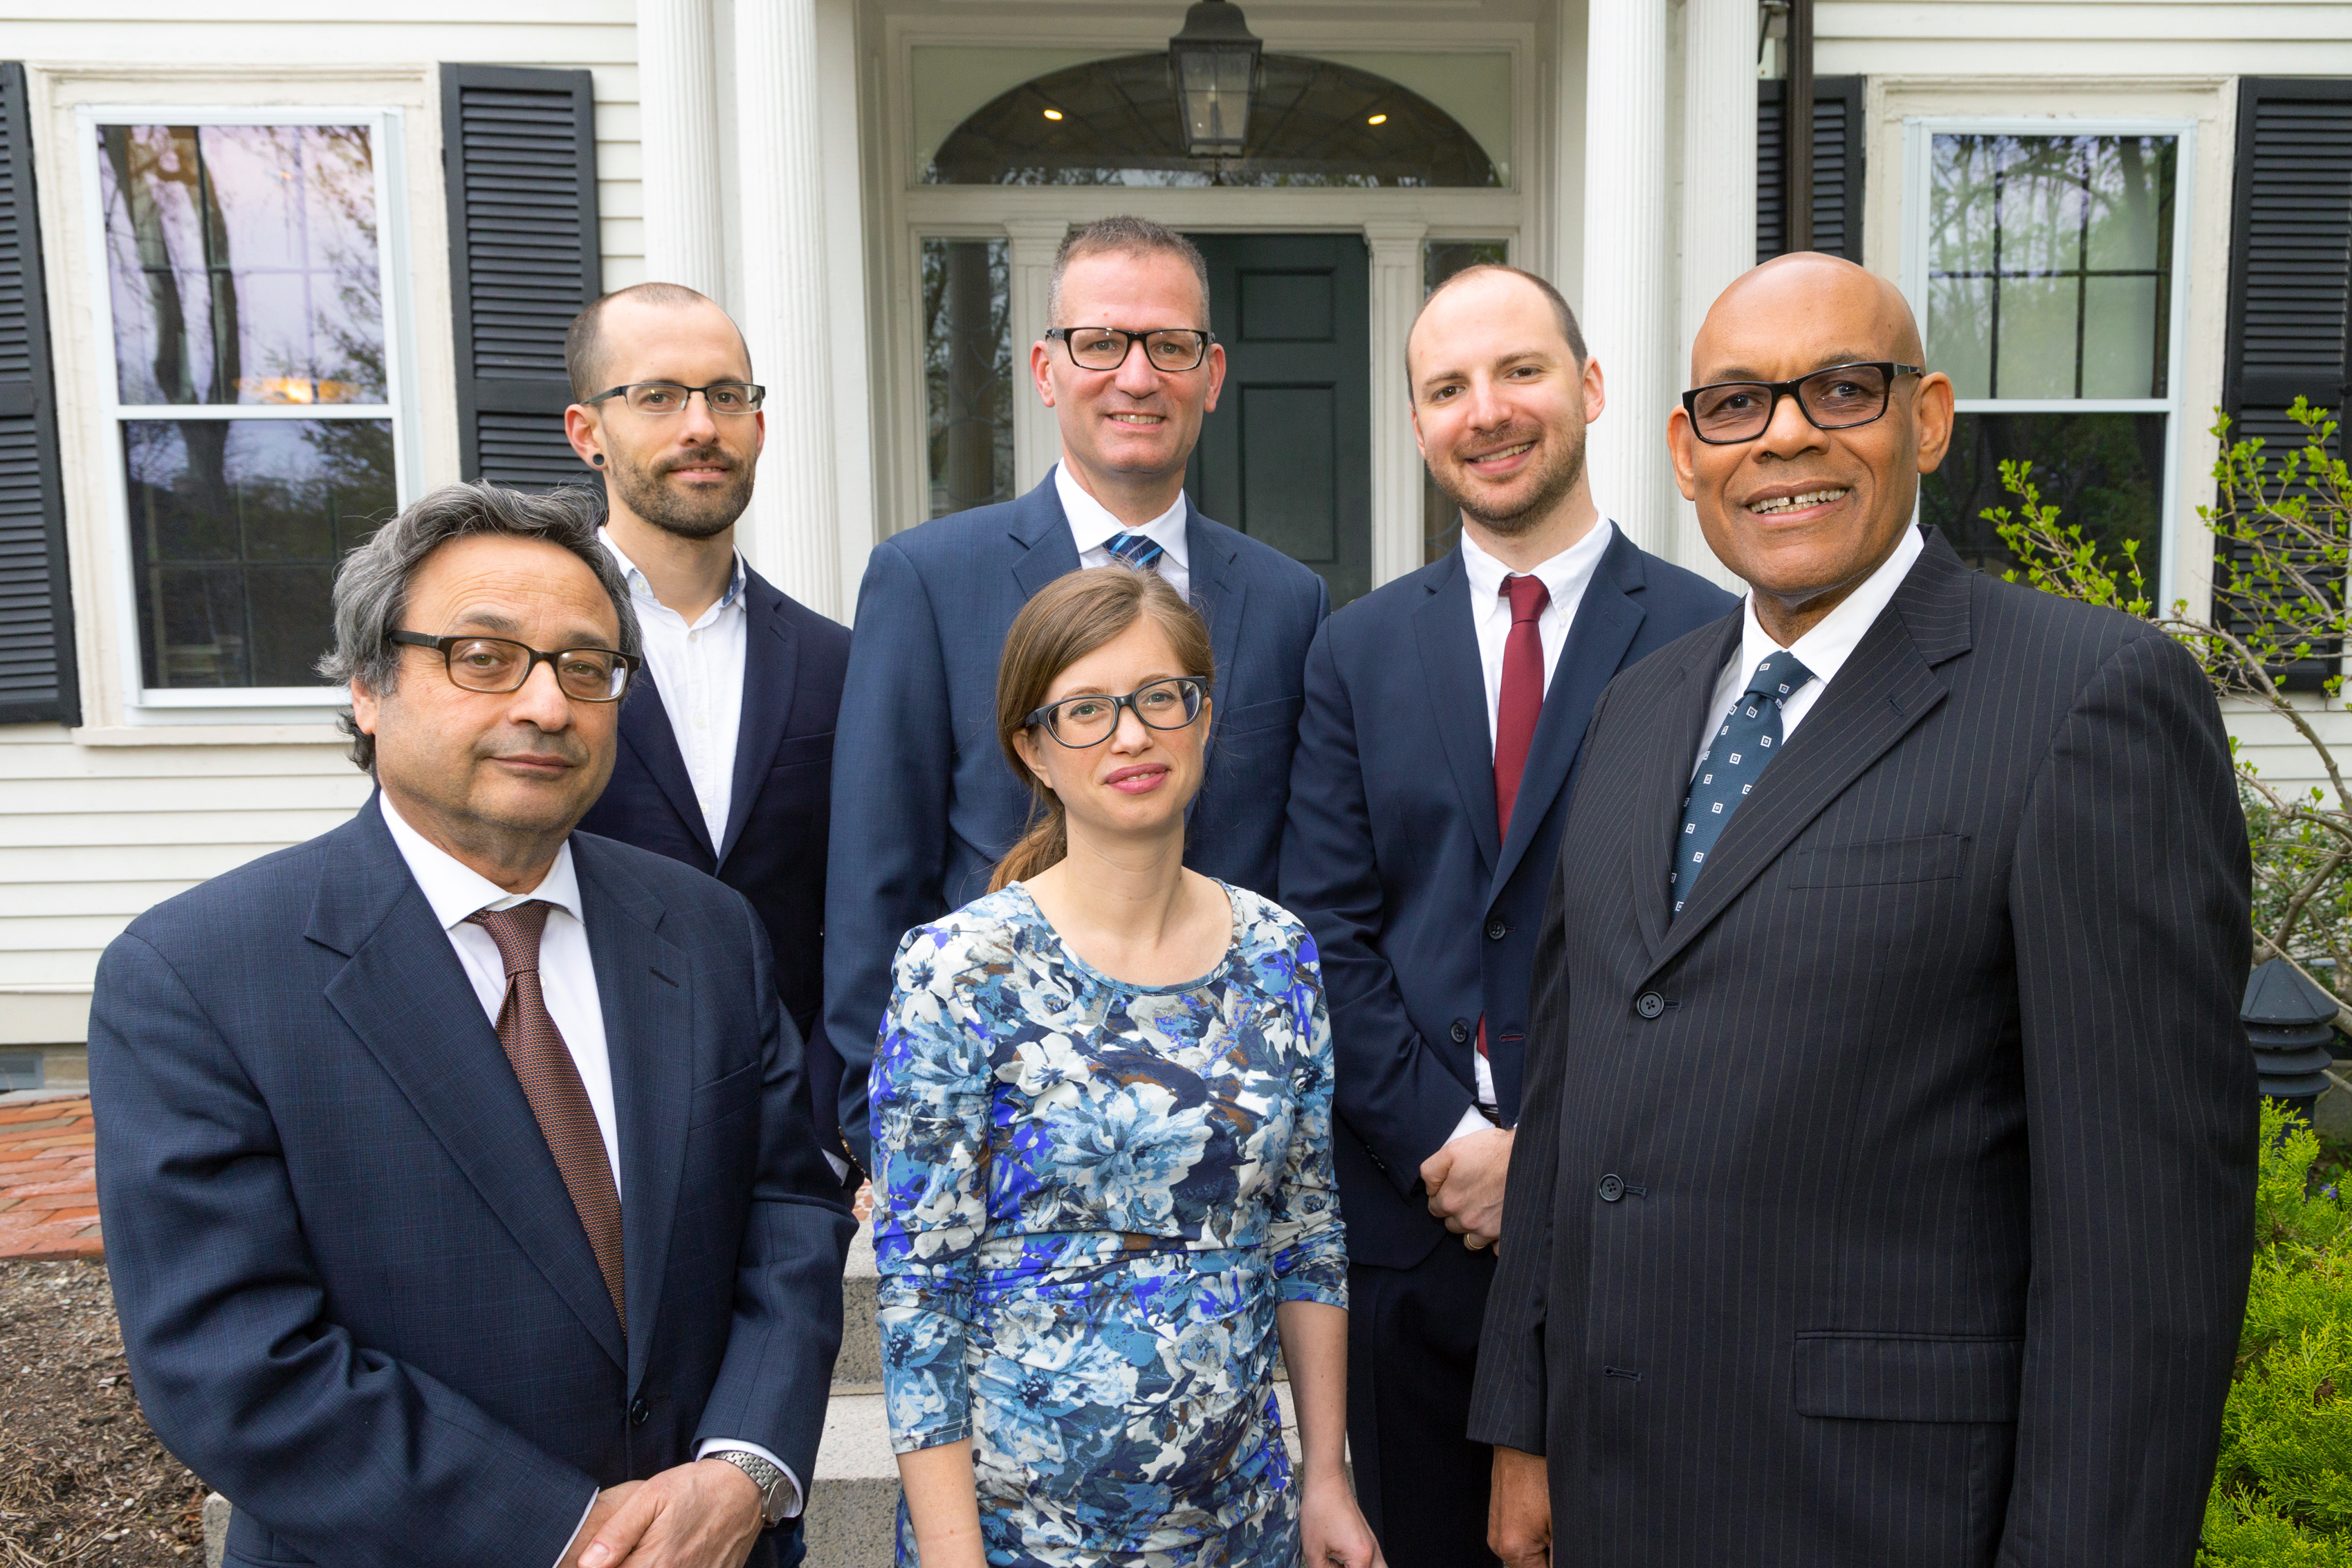 2019 Lukas Prize Project recipients, from left: Andrew Delbanco, Shane Bauer, Lauren Hilgers, Steven Dudley, Maurice Chammah and Jeffrey C. Stewart